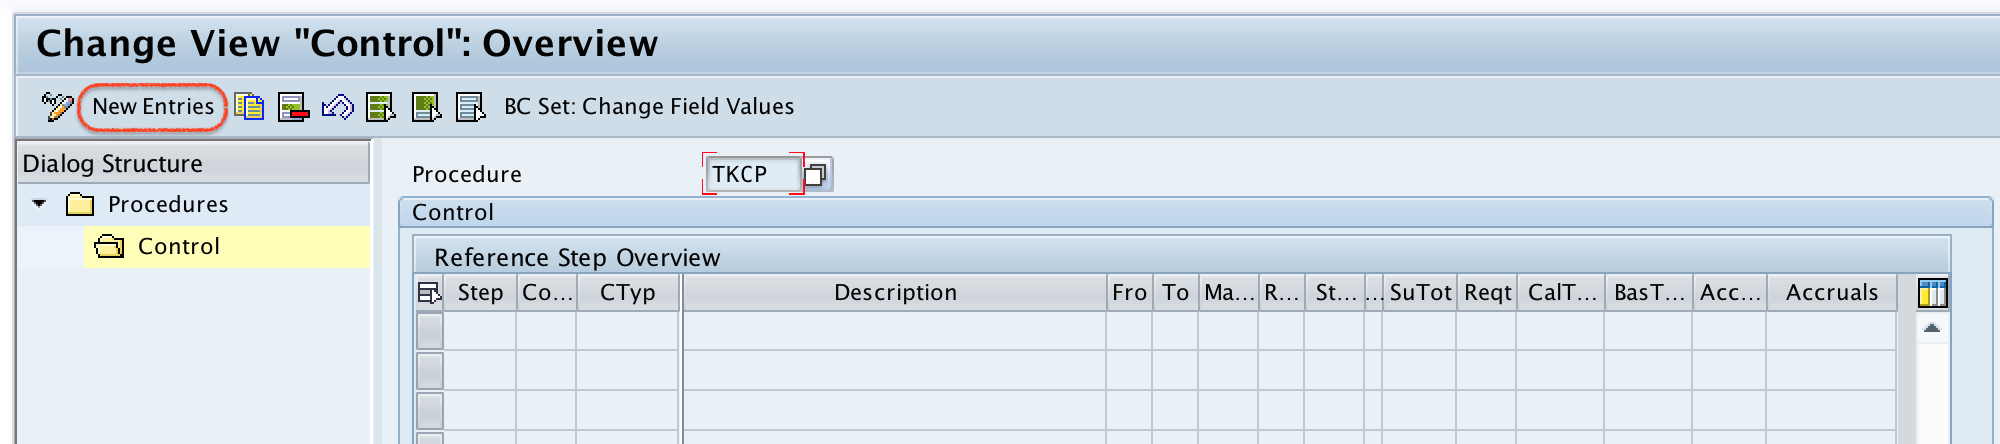 tax procedure assignment table in sap